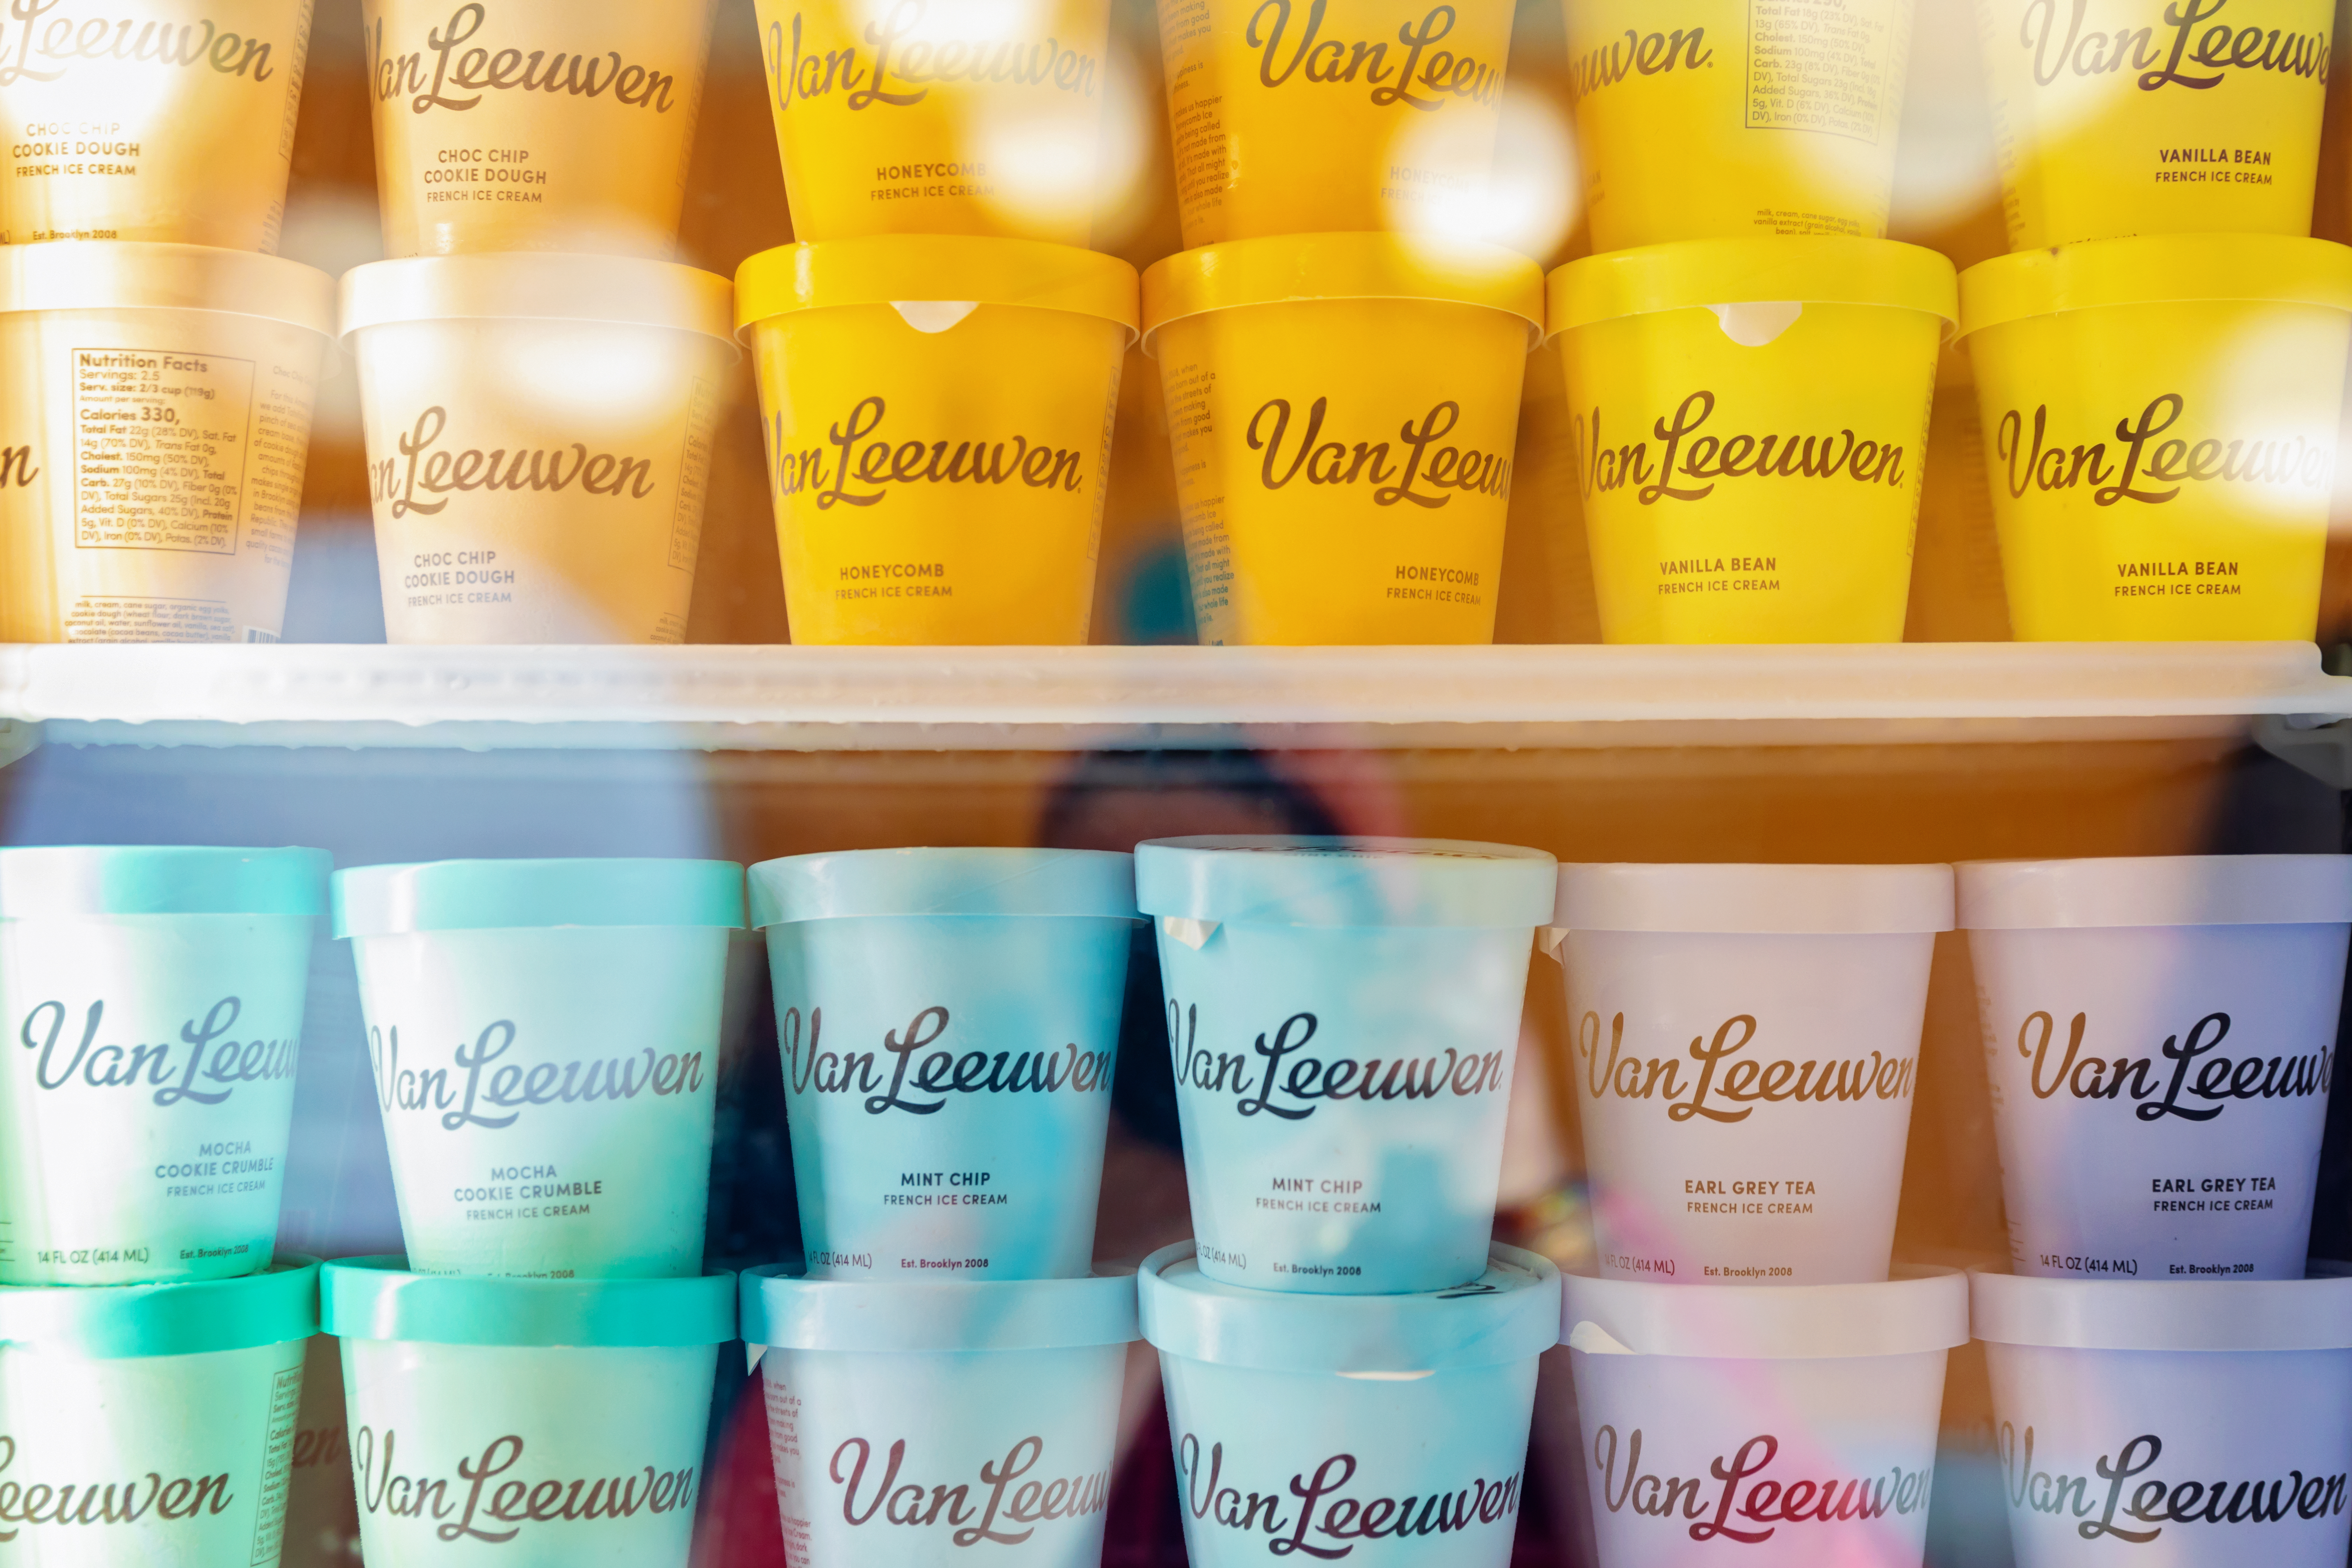 In freezer cases, dozens of containers of Van Leeuwen ice cream sit. They are orange, green, blue, and purple.